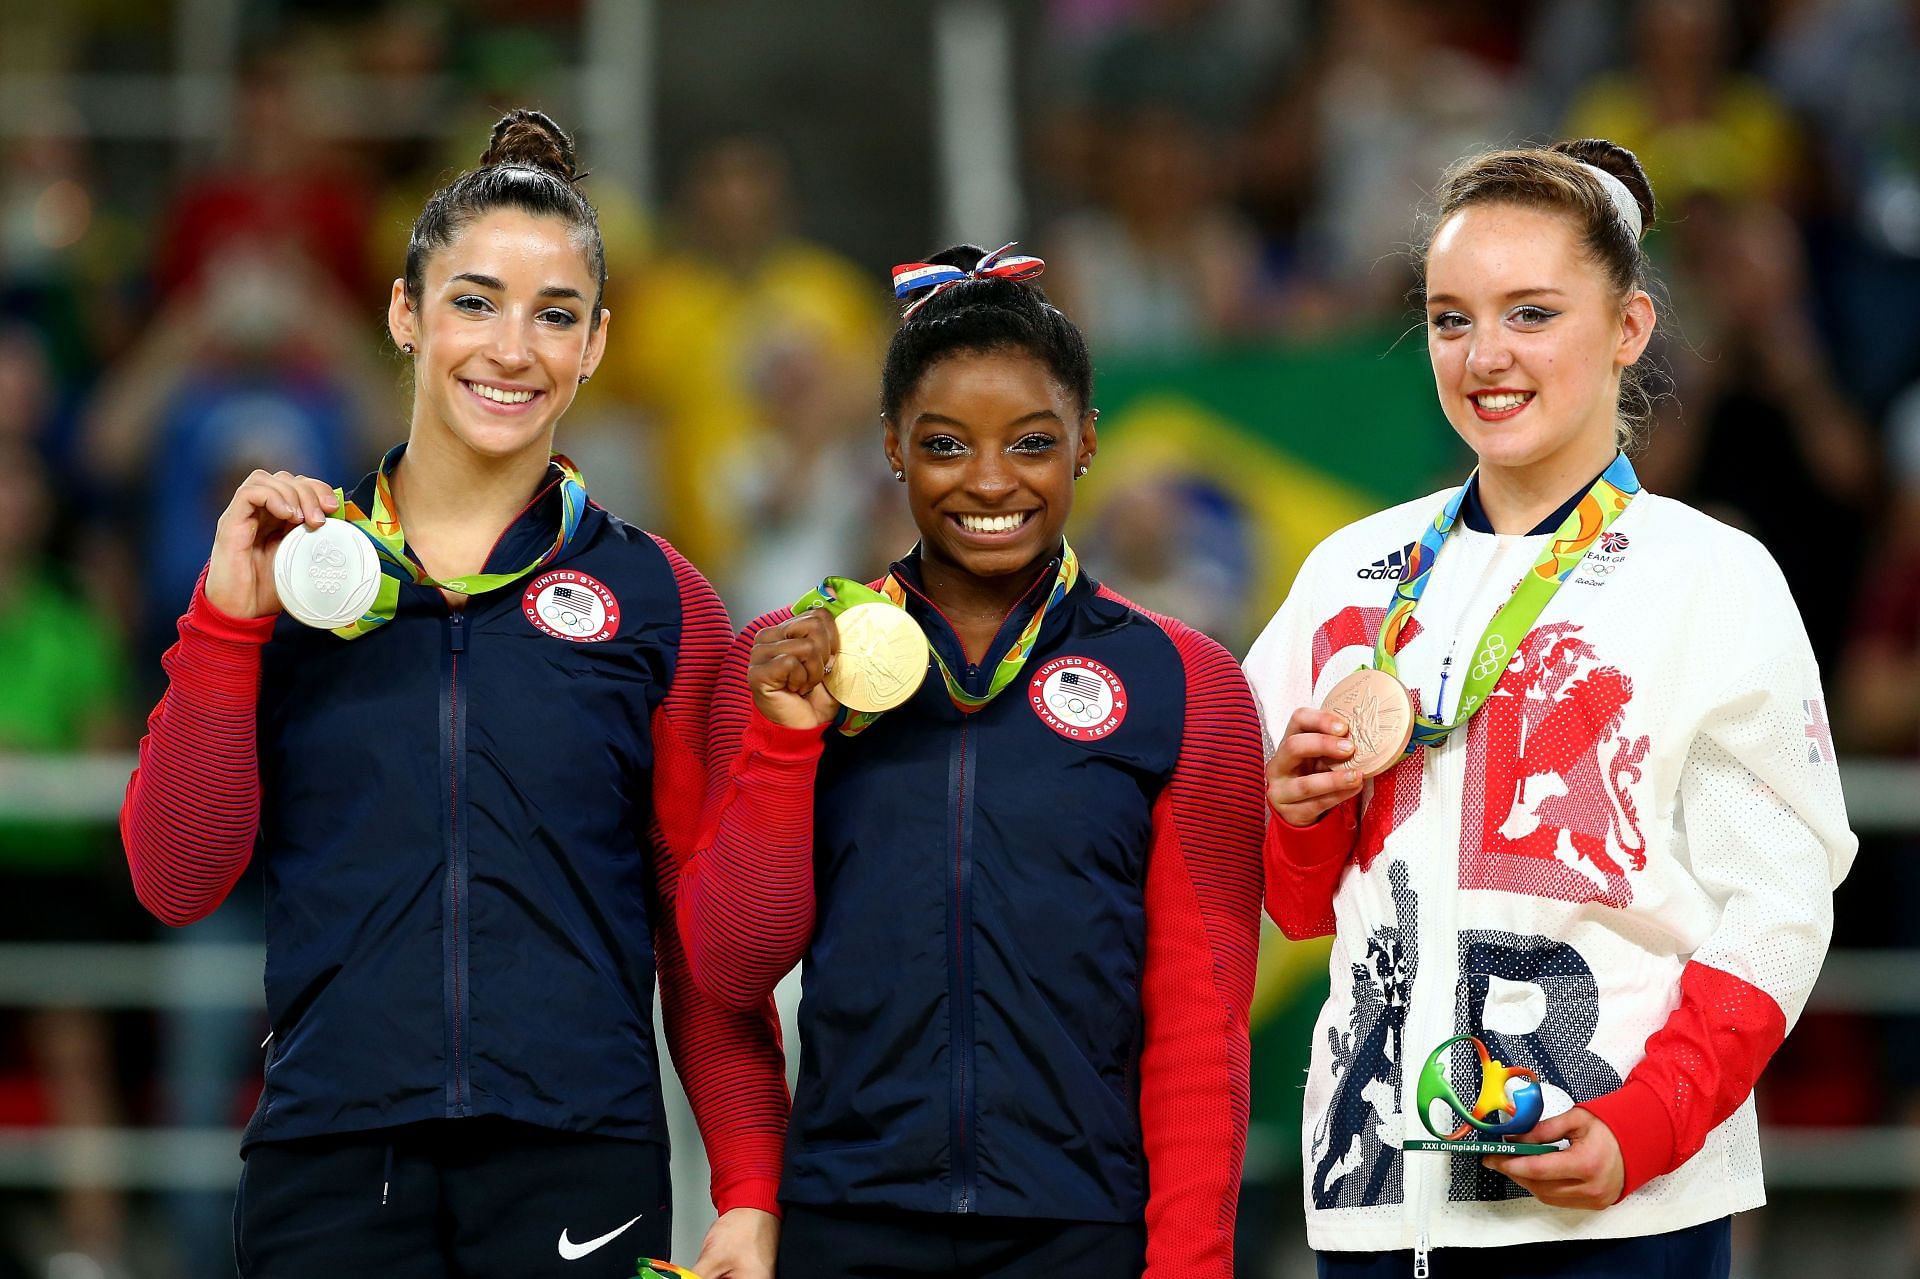 Alexandra Raisman (Silver), Simone Biles (Gold), and Amy Tinkler (Bronze) on the podium at the medal ceremony for the Women&#039;s Floor at 2016 Rio Games